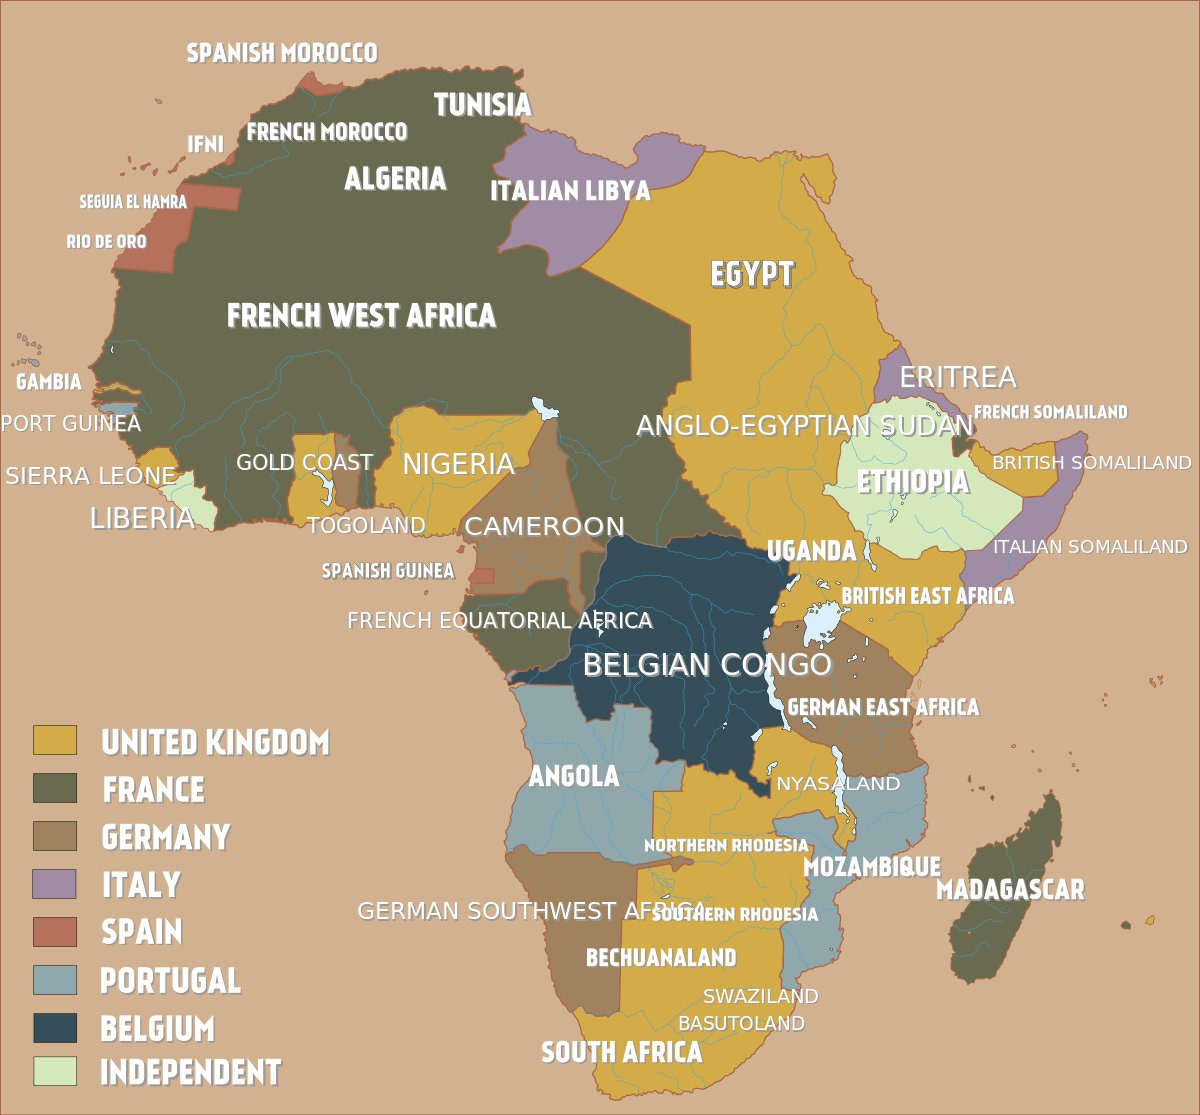 European claims over Africa